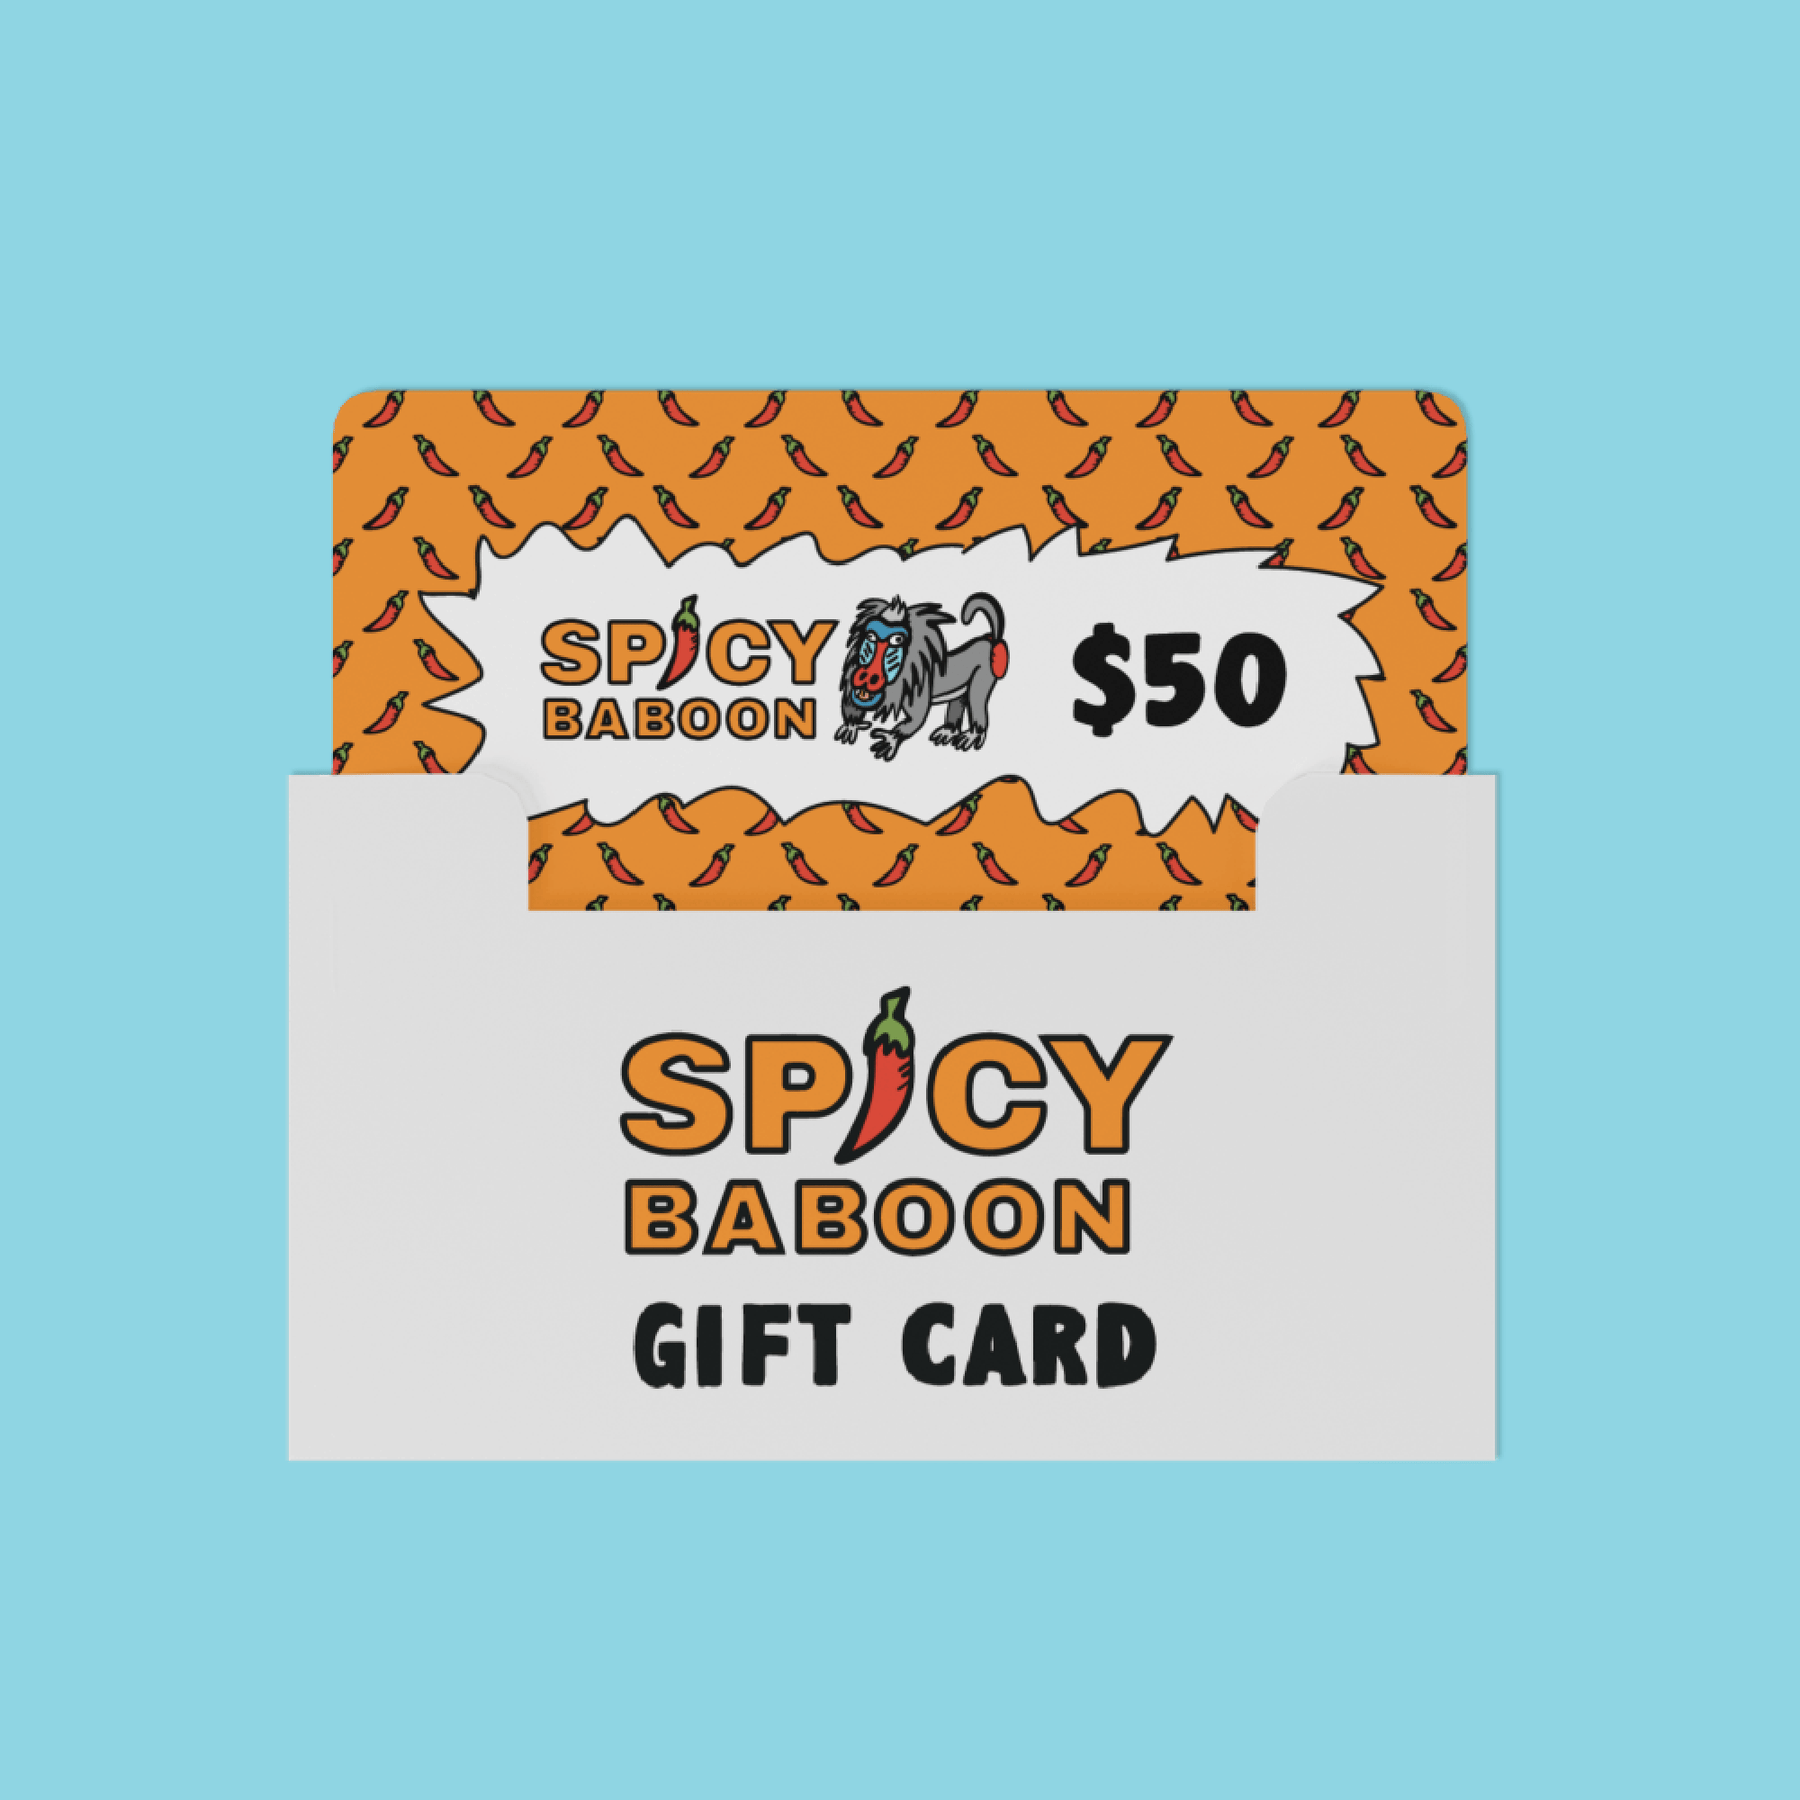 $50.00 Spicy Baboon Gift Card 🤑